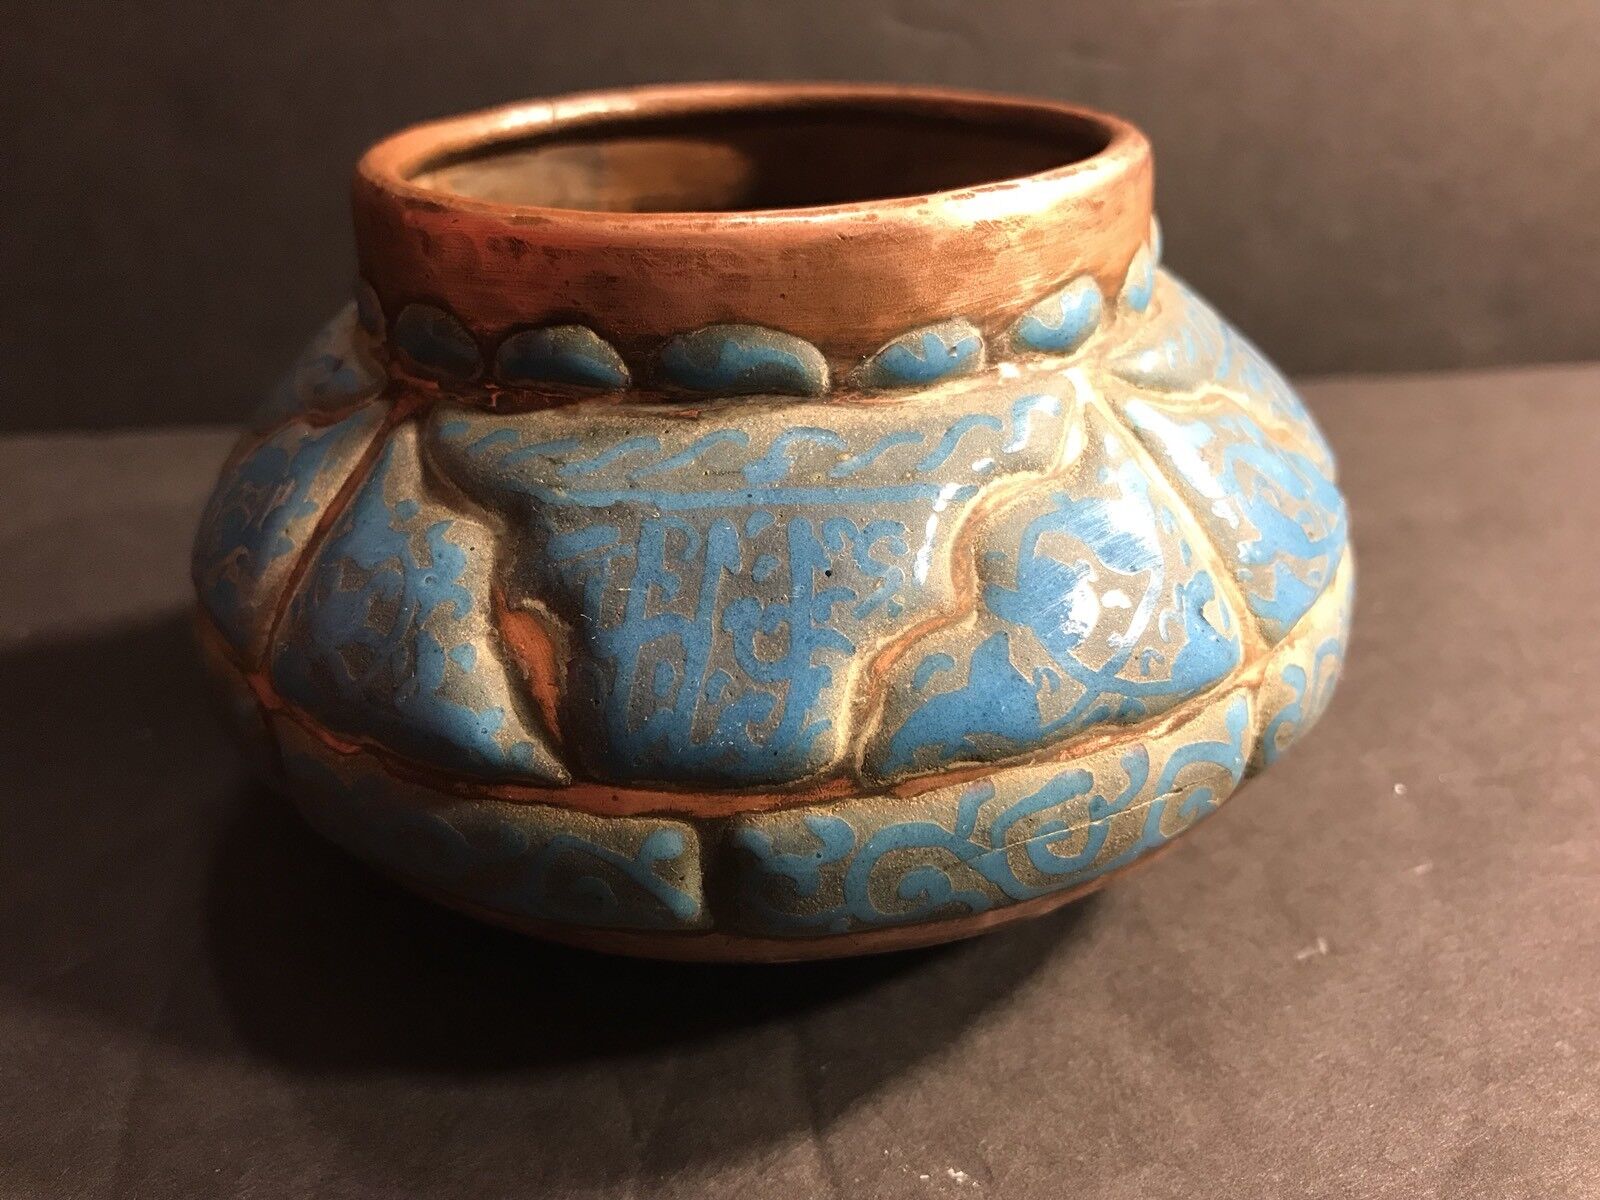 An Early Syria Or Egypt Islamic Work Of Art Copper And Enamel Bowl Circa 1840